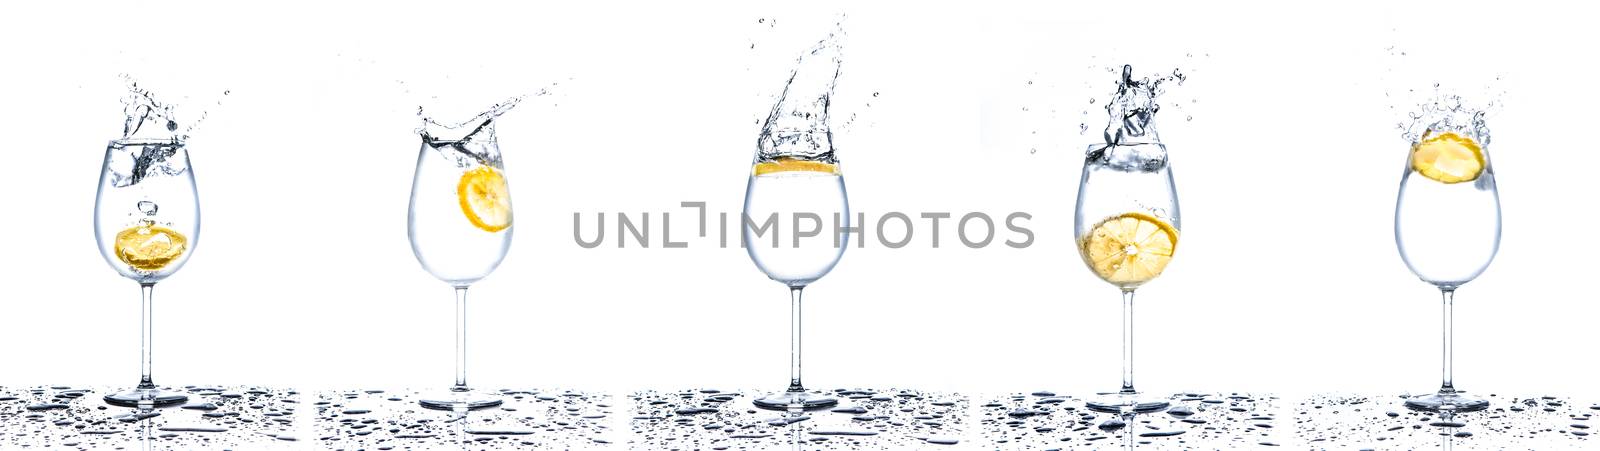 Lemon splashing into glasses of water on white background by martinm303